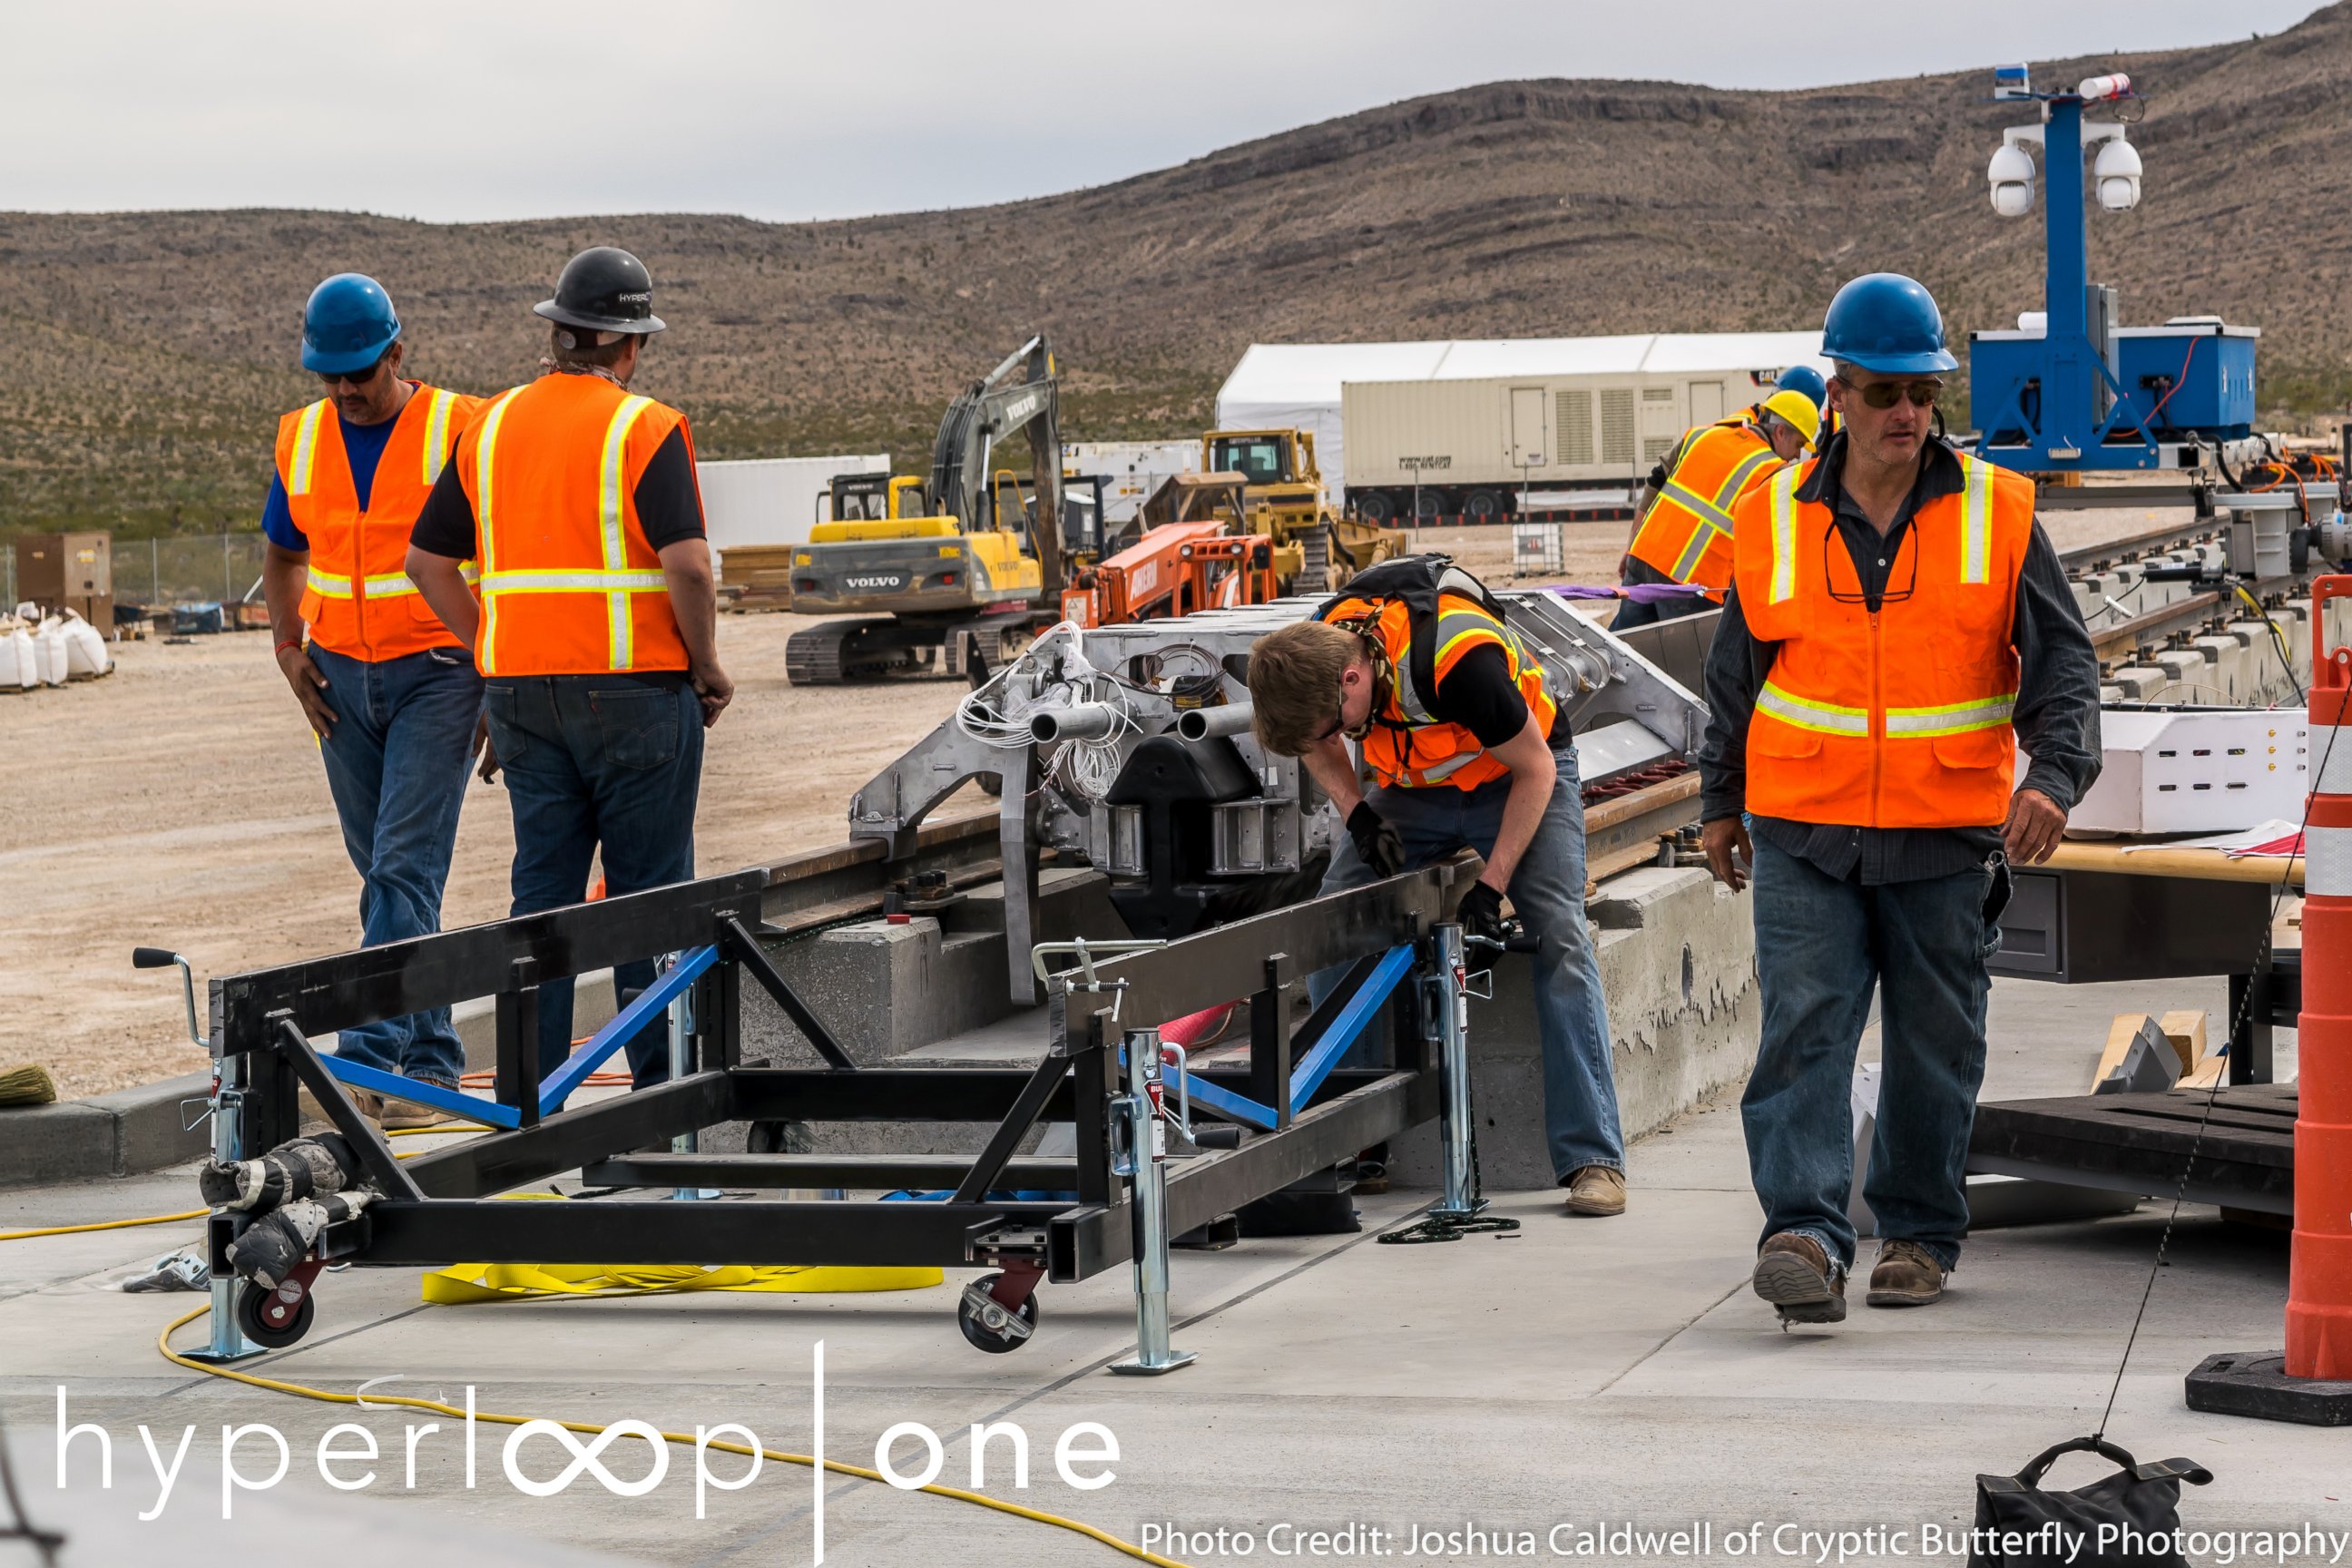 PHOTO: Engineers, creative minds and corporate partners unite to form a worldwide hyperloop ecosystem.